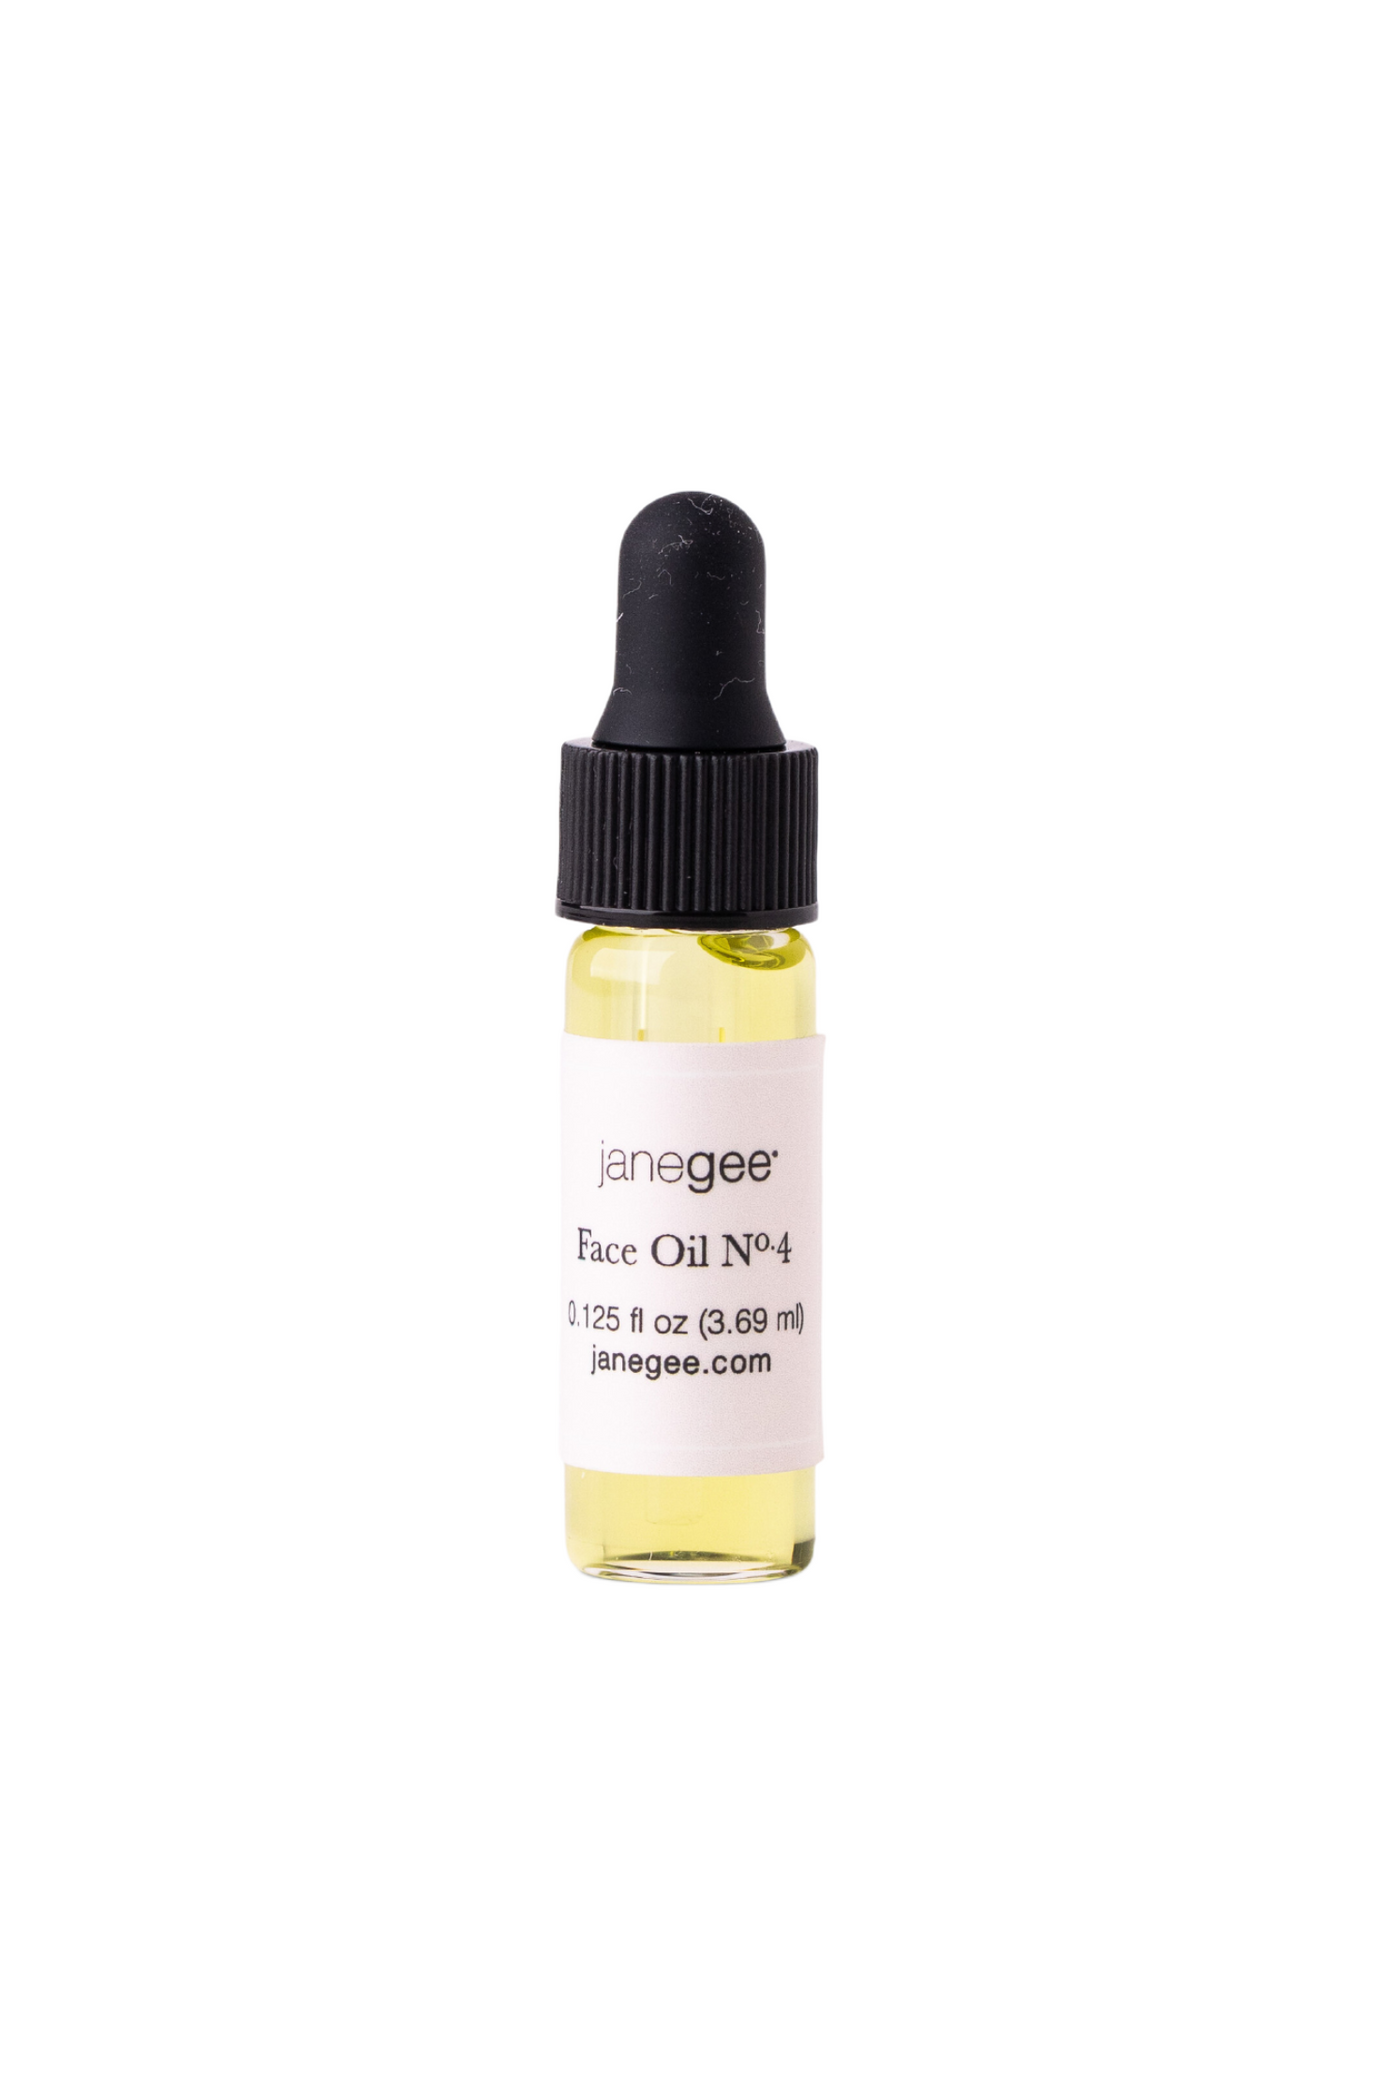 janegee Face Oil No.4 Sample